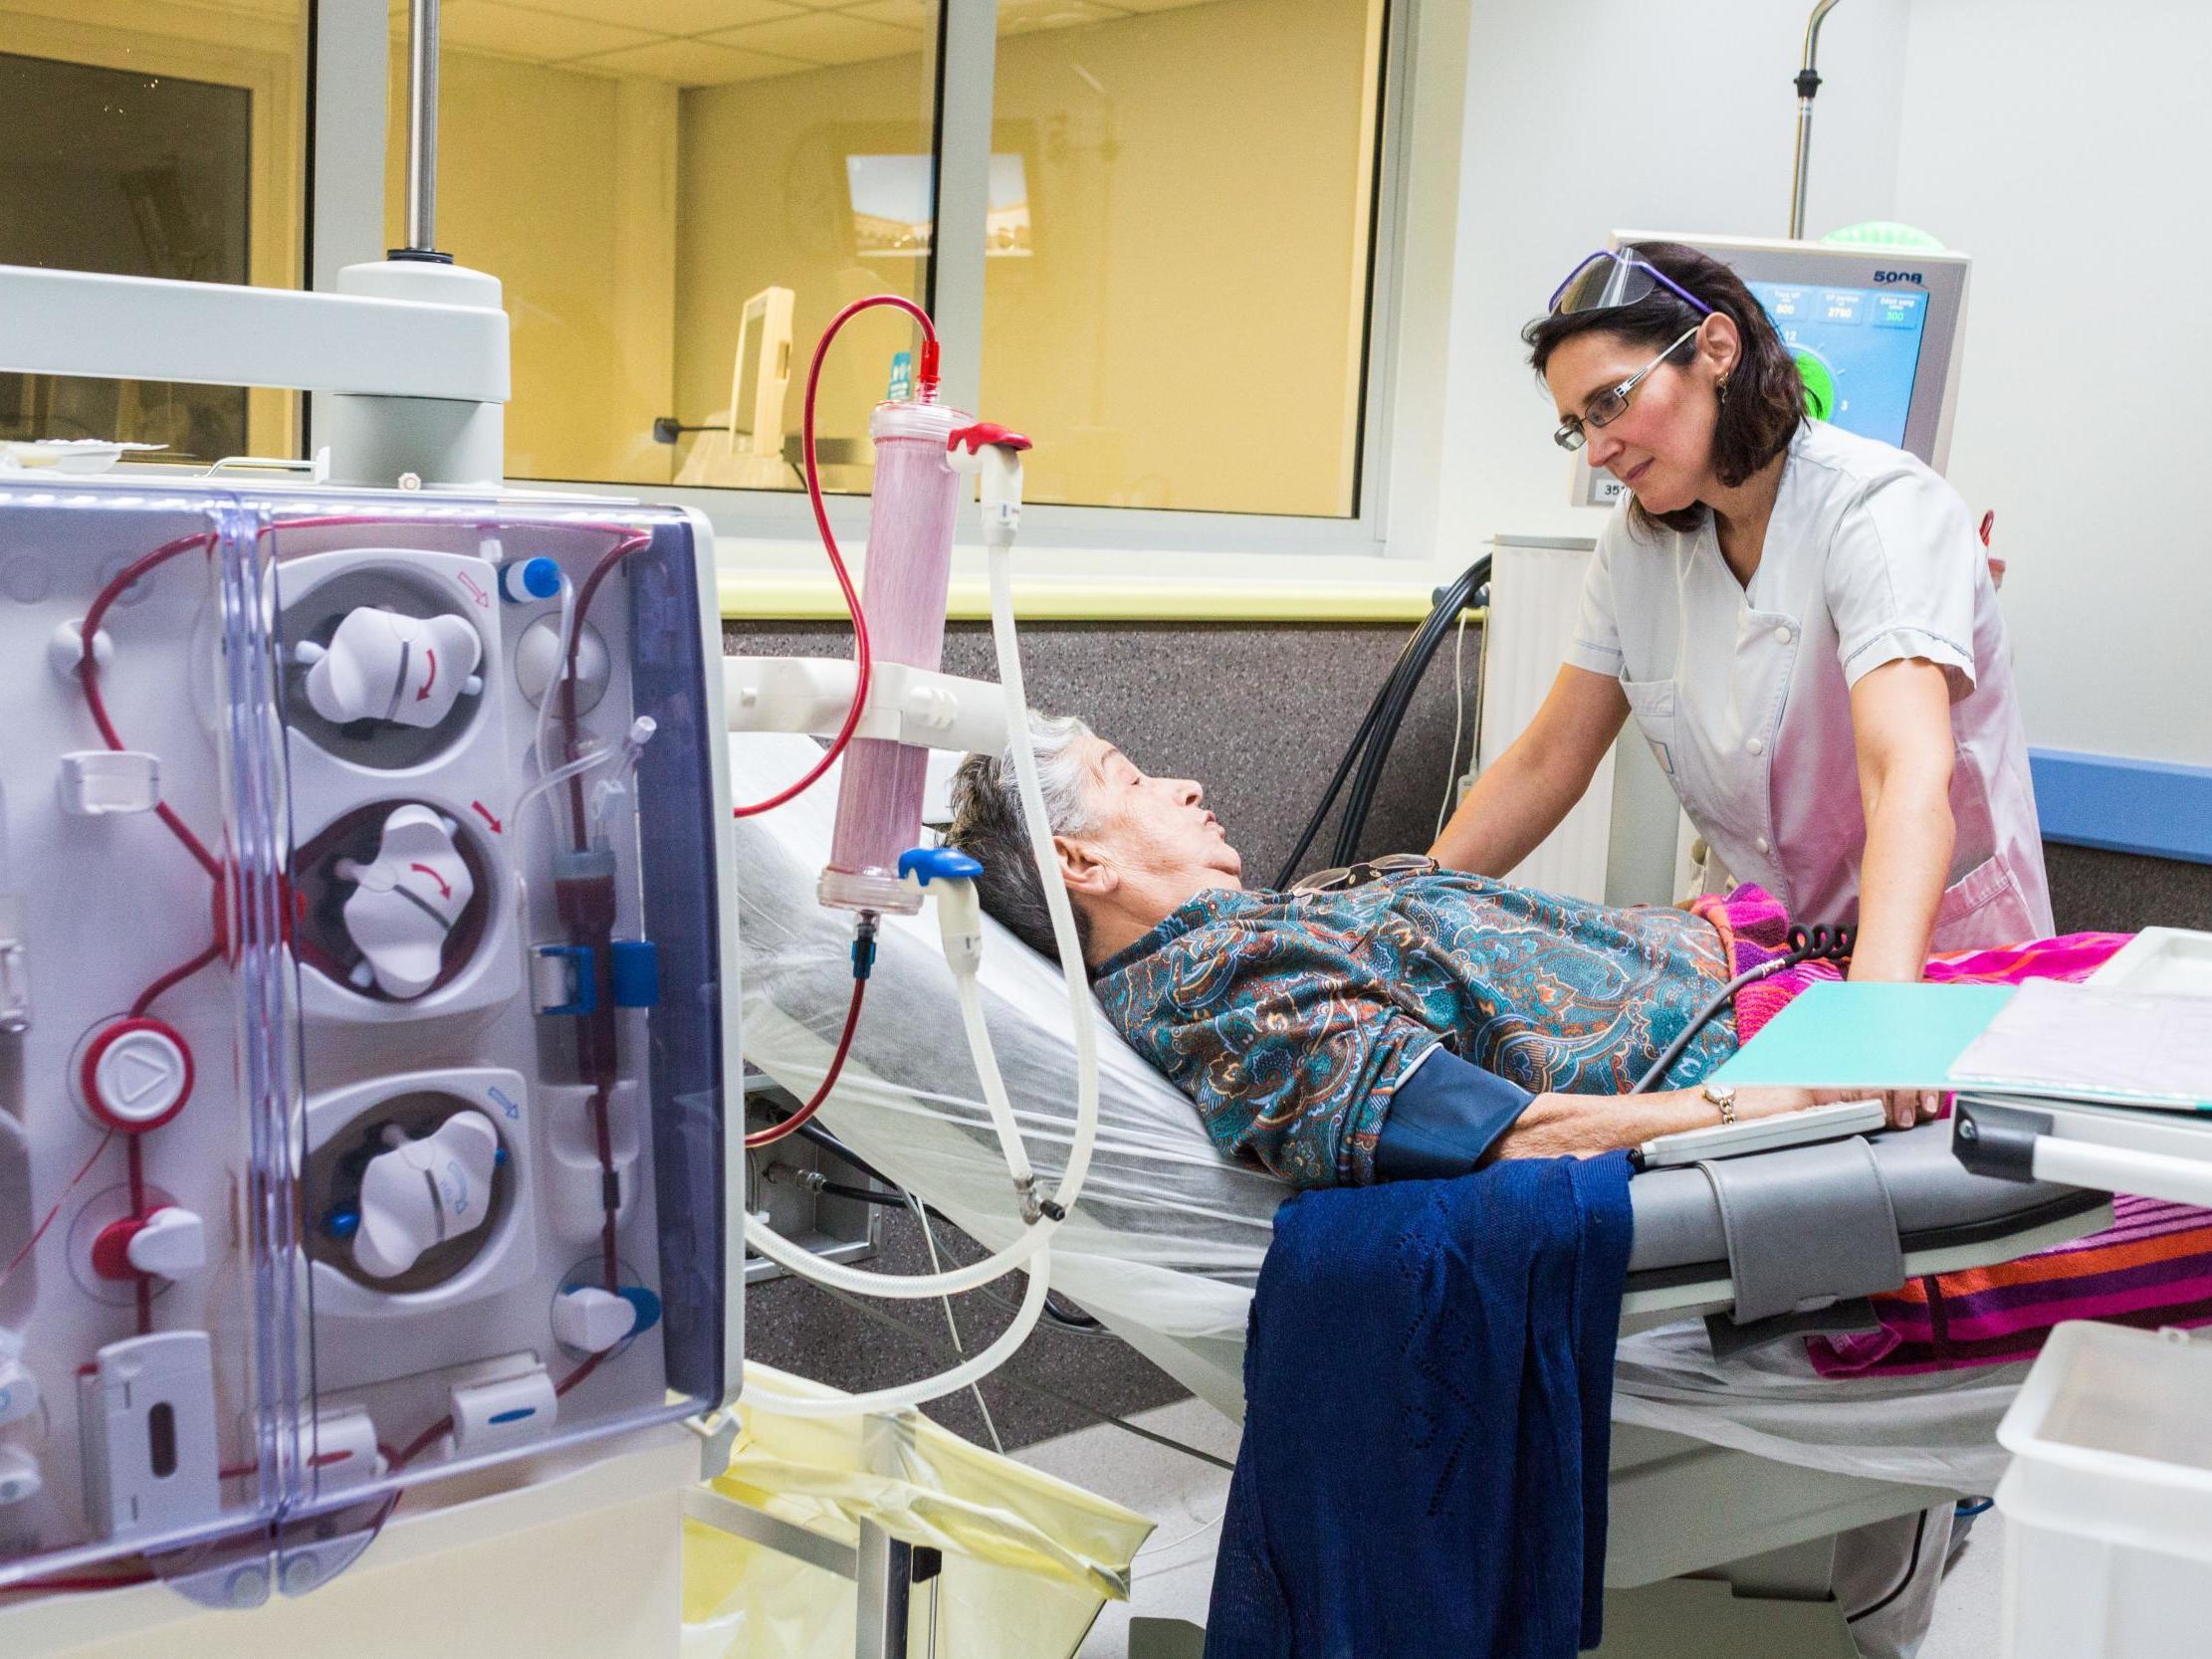 Millions of people living with kidney failure rely on time consuming dialysis to clean their blood